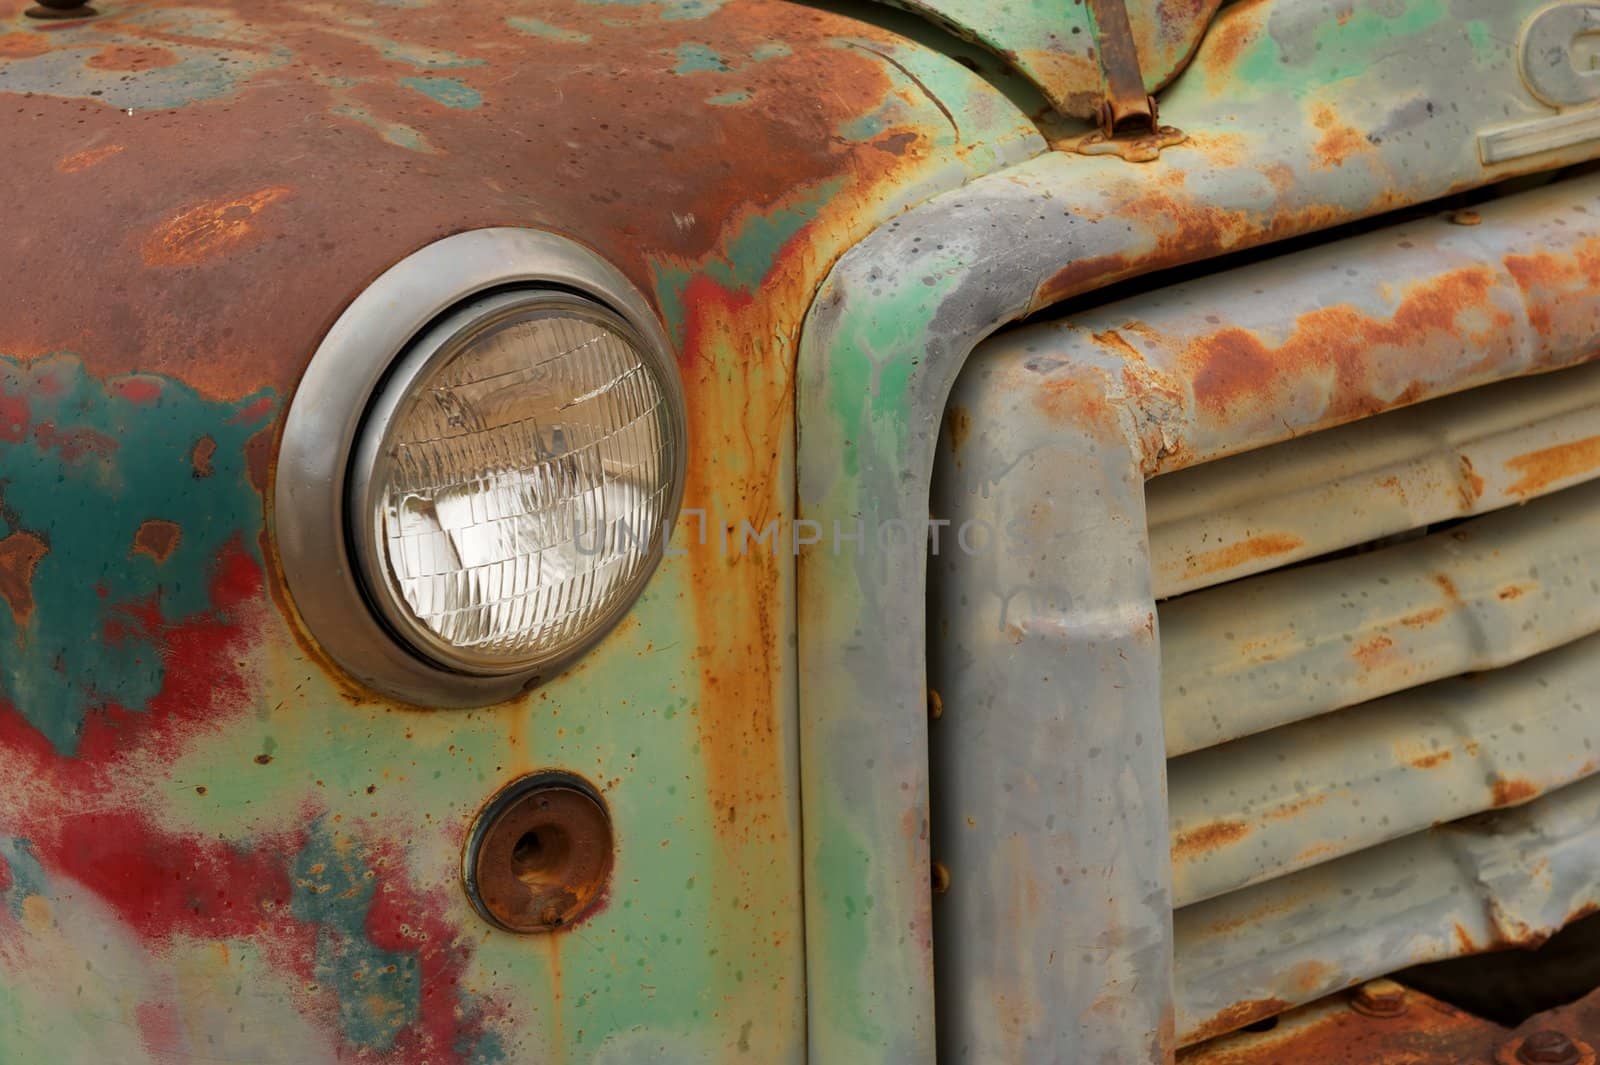 A green and red painted rusty front grill of an antique truck with glass headlight